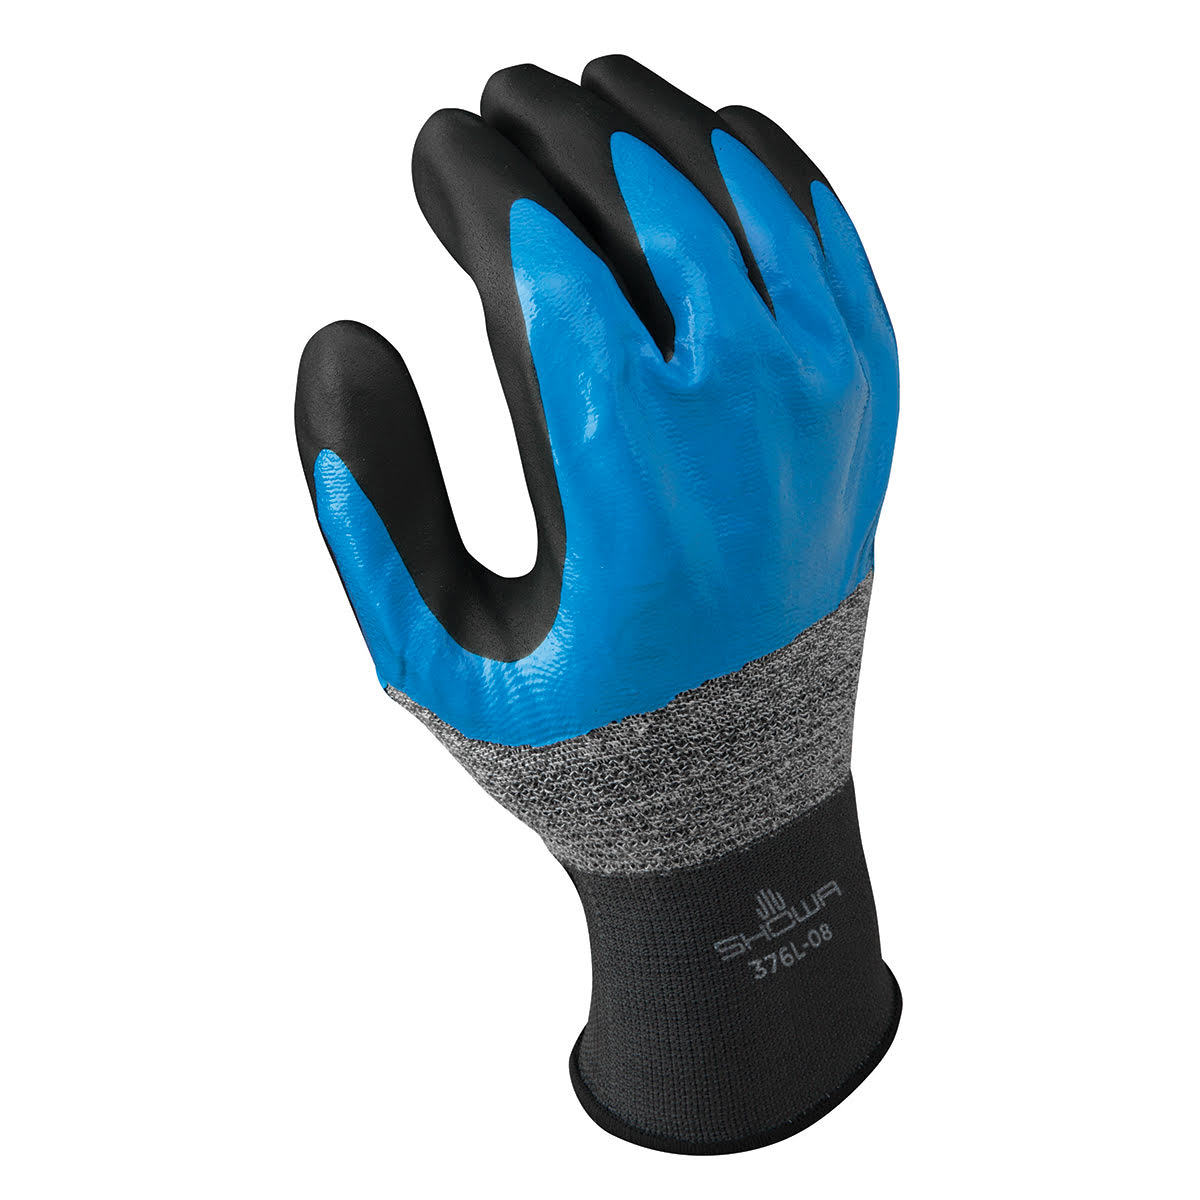 SHOWA® Size 9 13 Gauge Foam Nitrile Full Hand Coated Work Gloves With Seamless Knit Liner And Knit Wrist